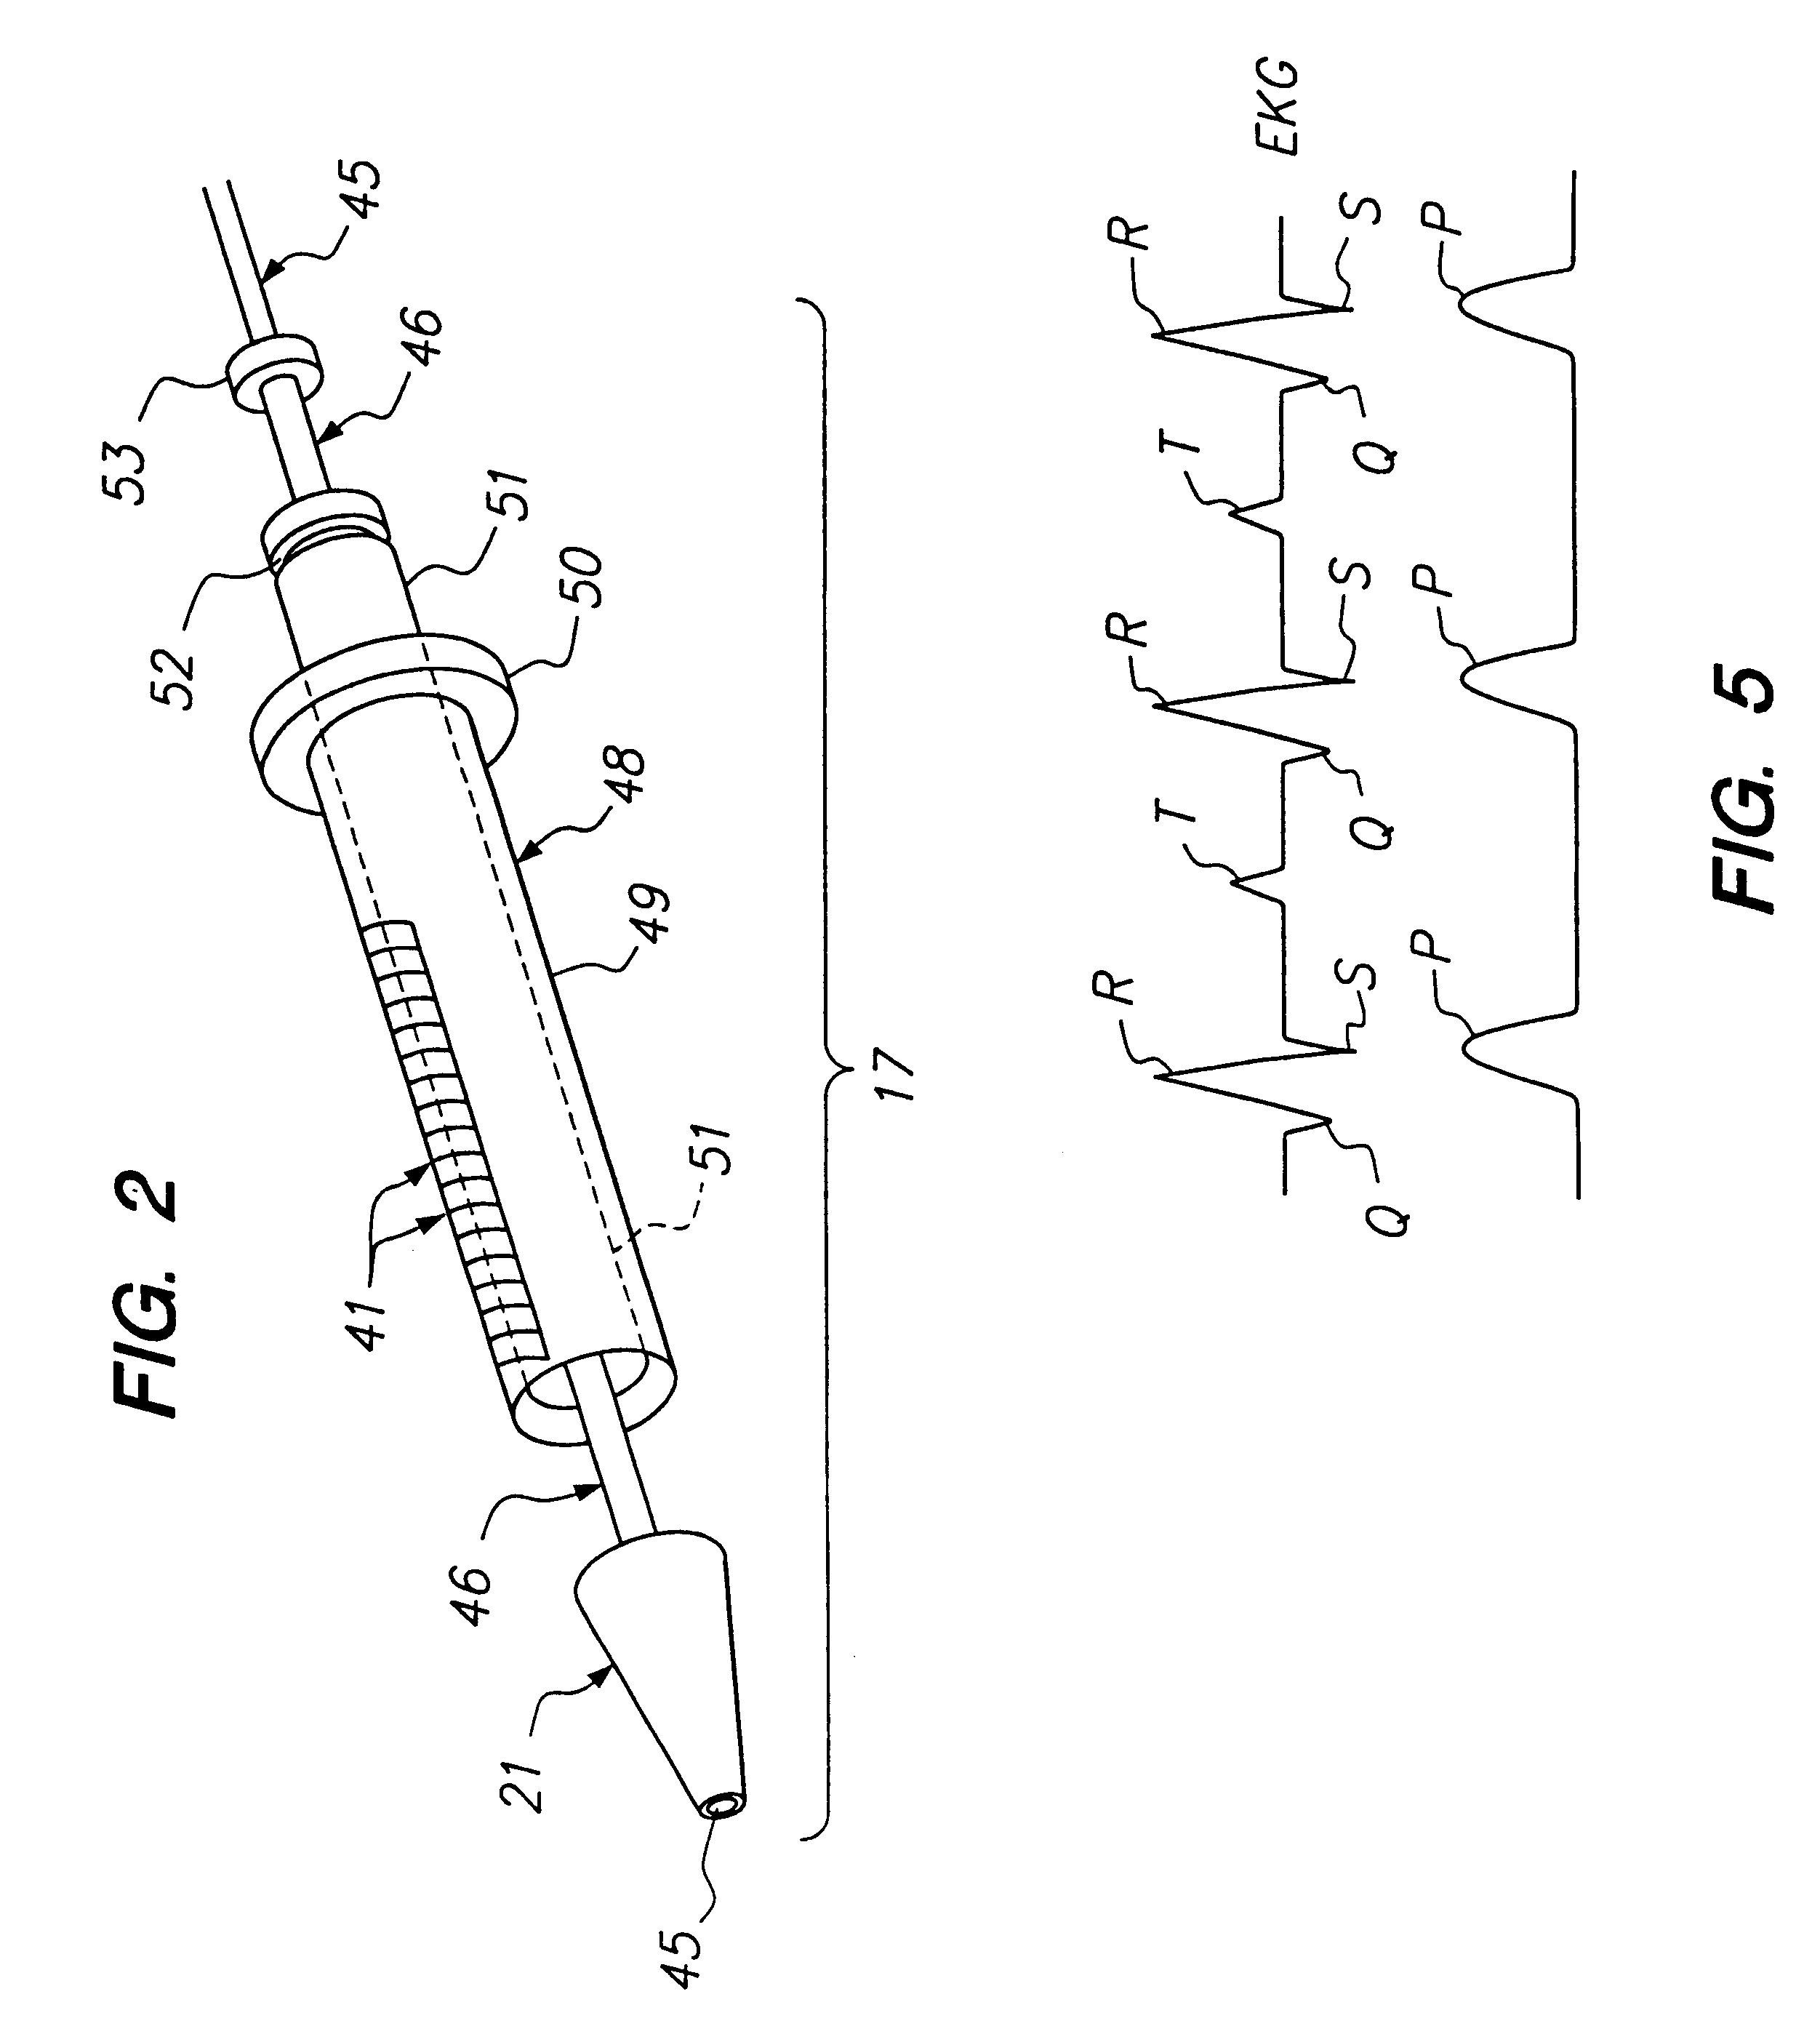 Method and apparatus for creation of drug delivery and/or stimulation pockets in myocardium